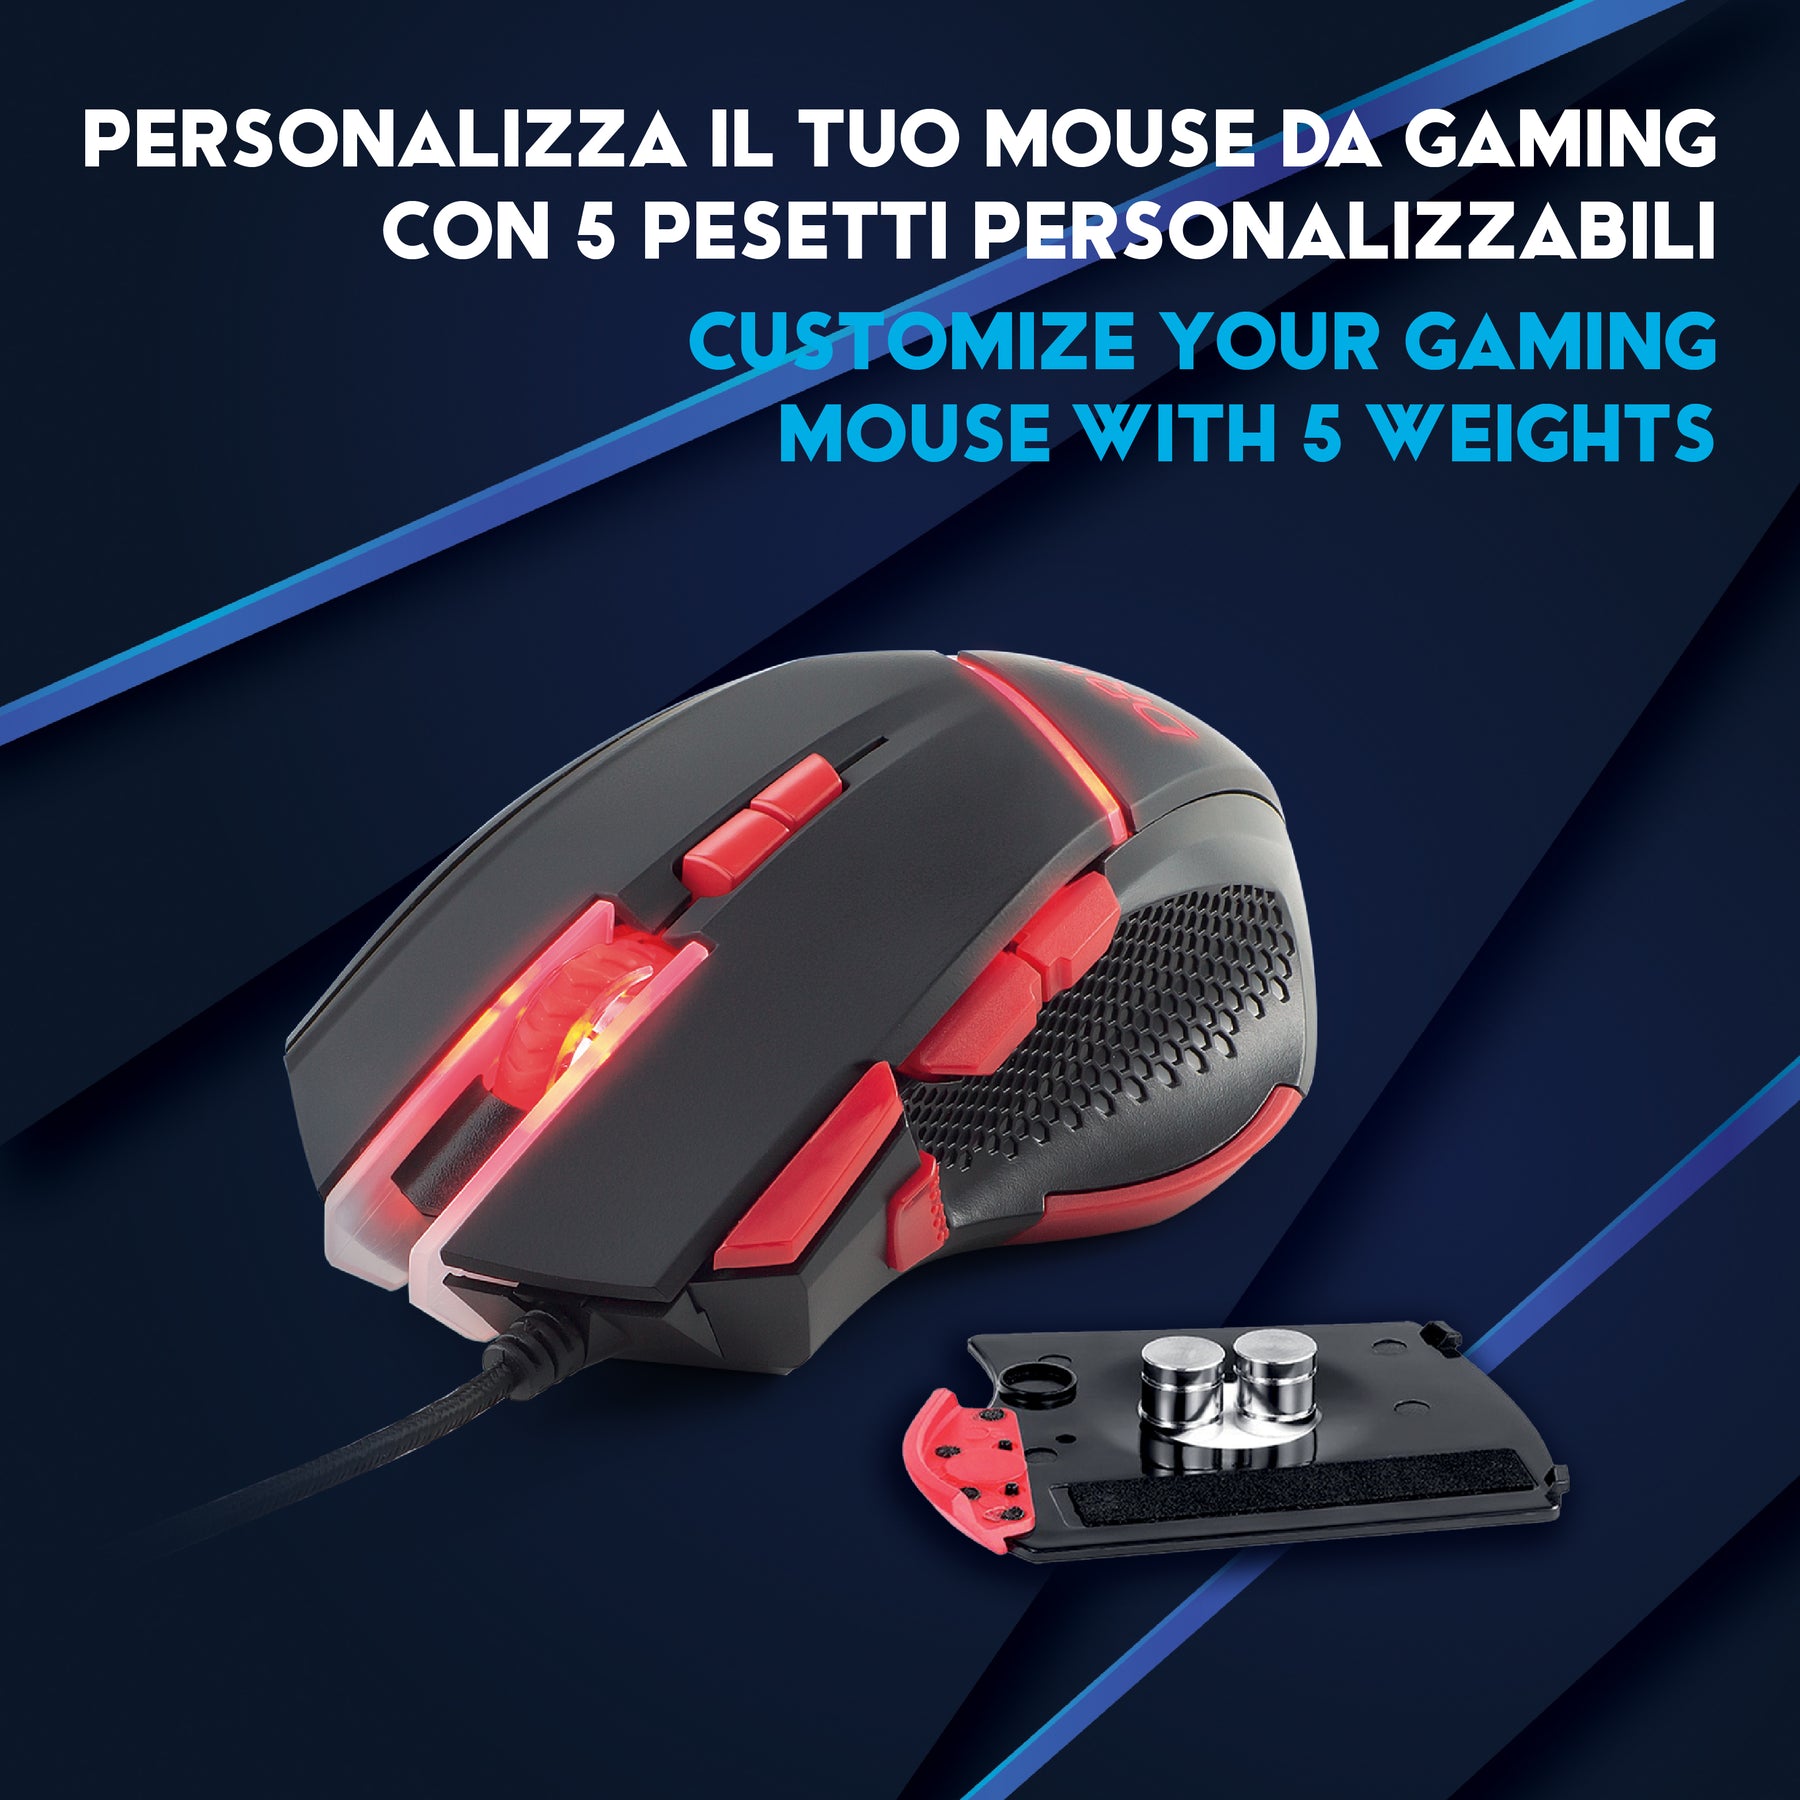 Hunter+ USB gaming mouse Pro for PC/PS4